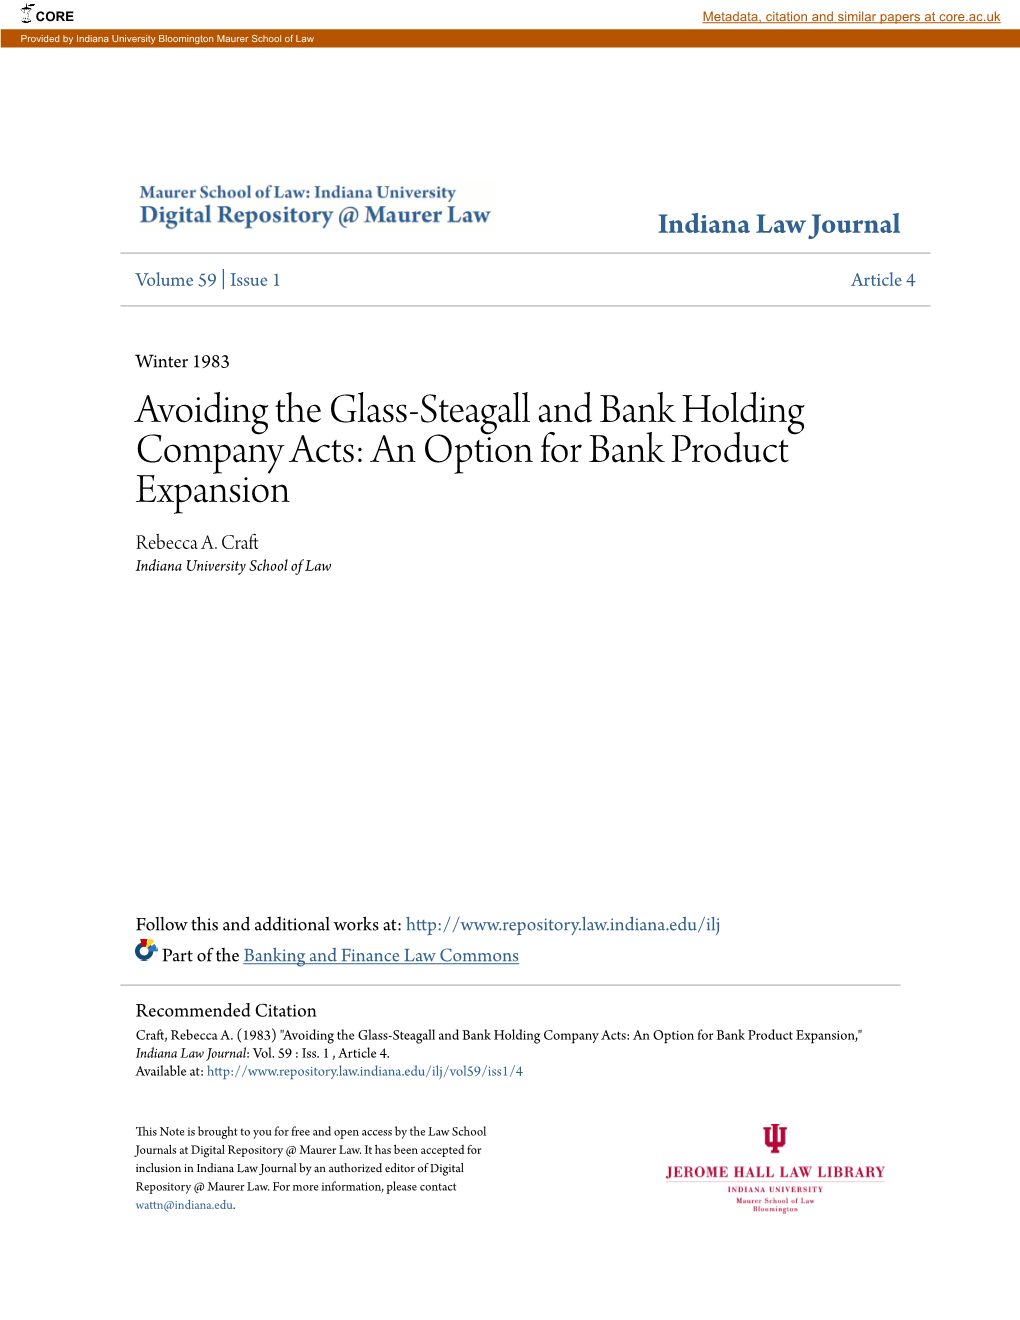 Avoiding the Glass-Steagall and Bank Holding Company Acts: an Option for Bank Product Expansion Rebecca A